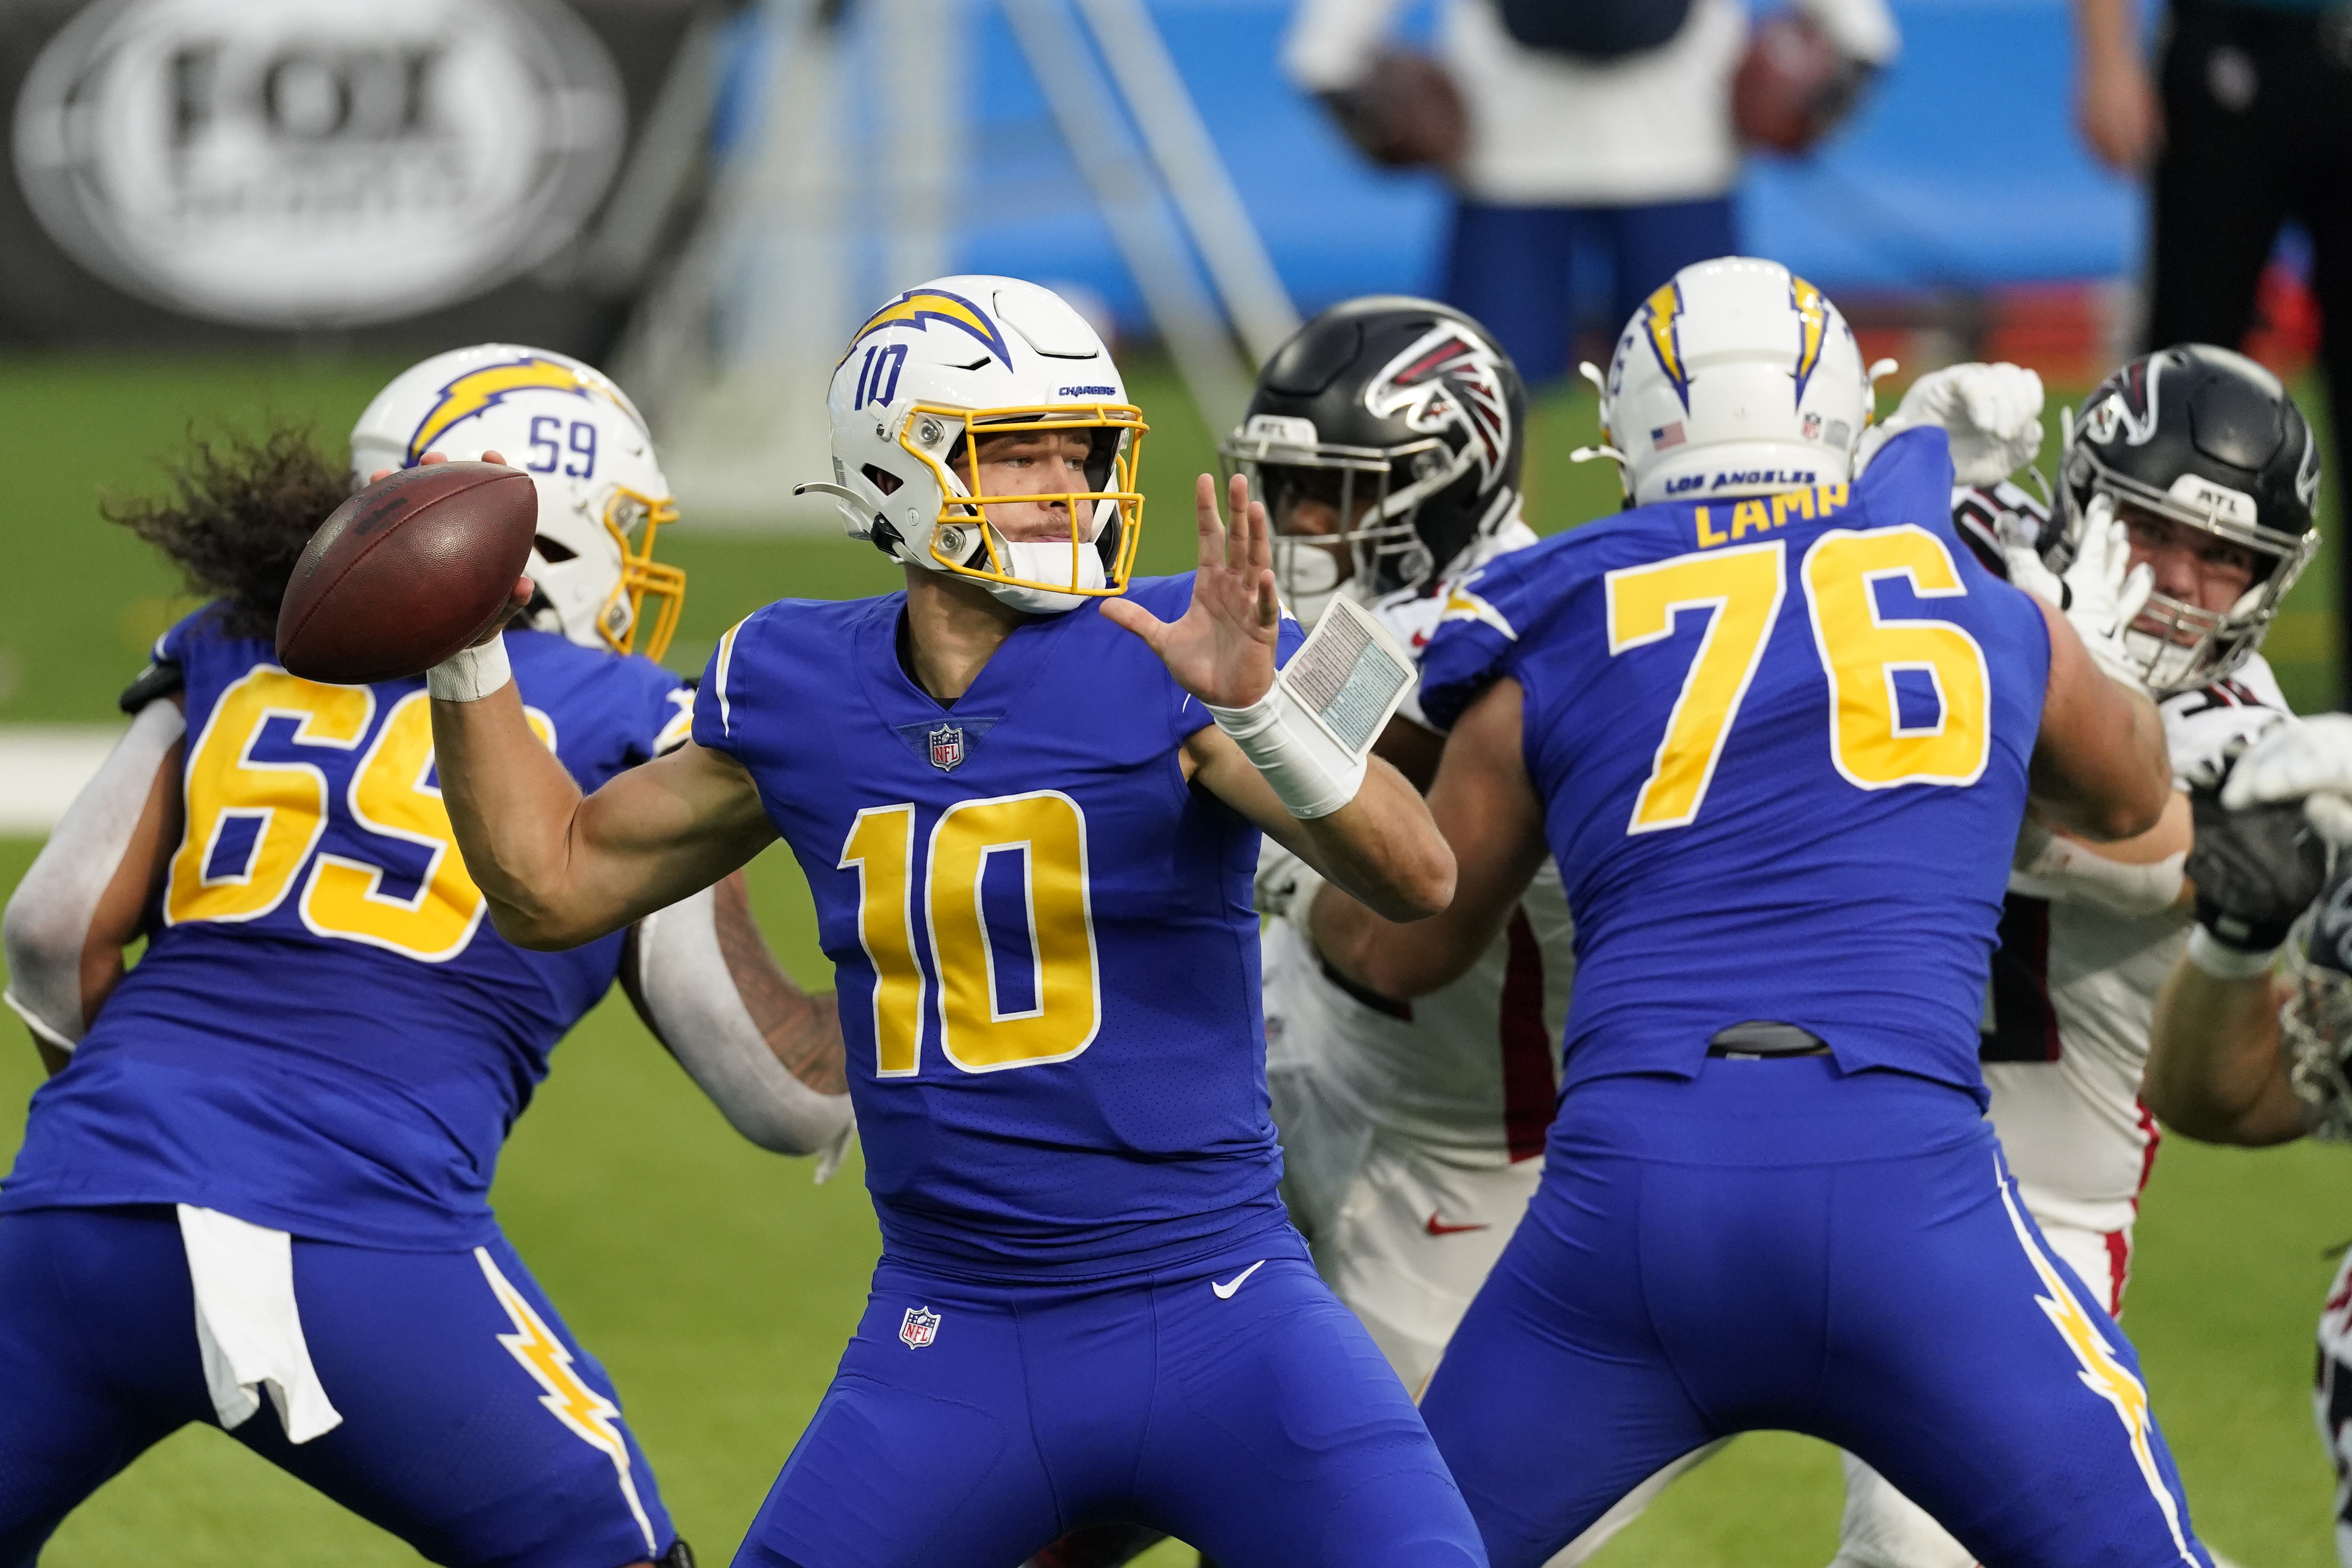 chargers color rush 2020